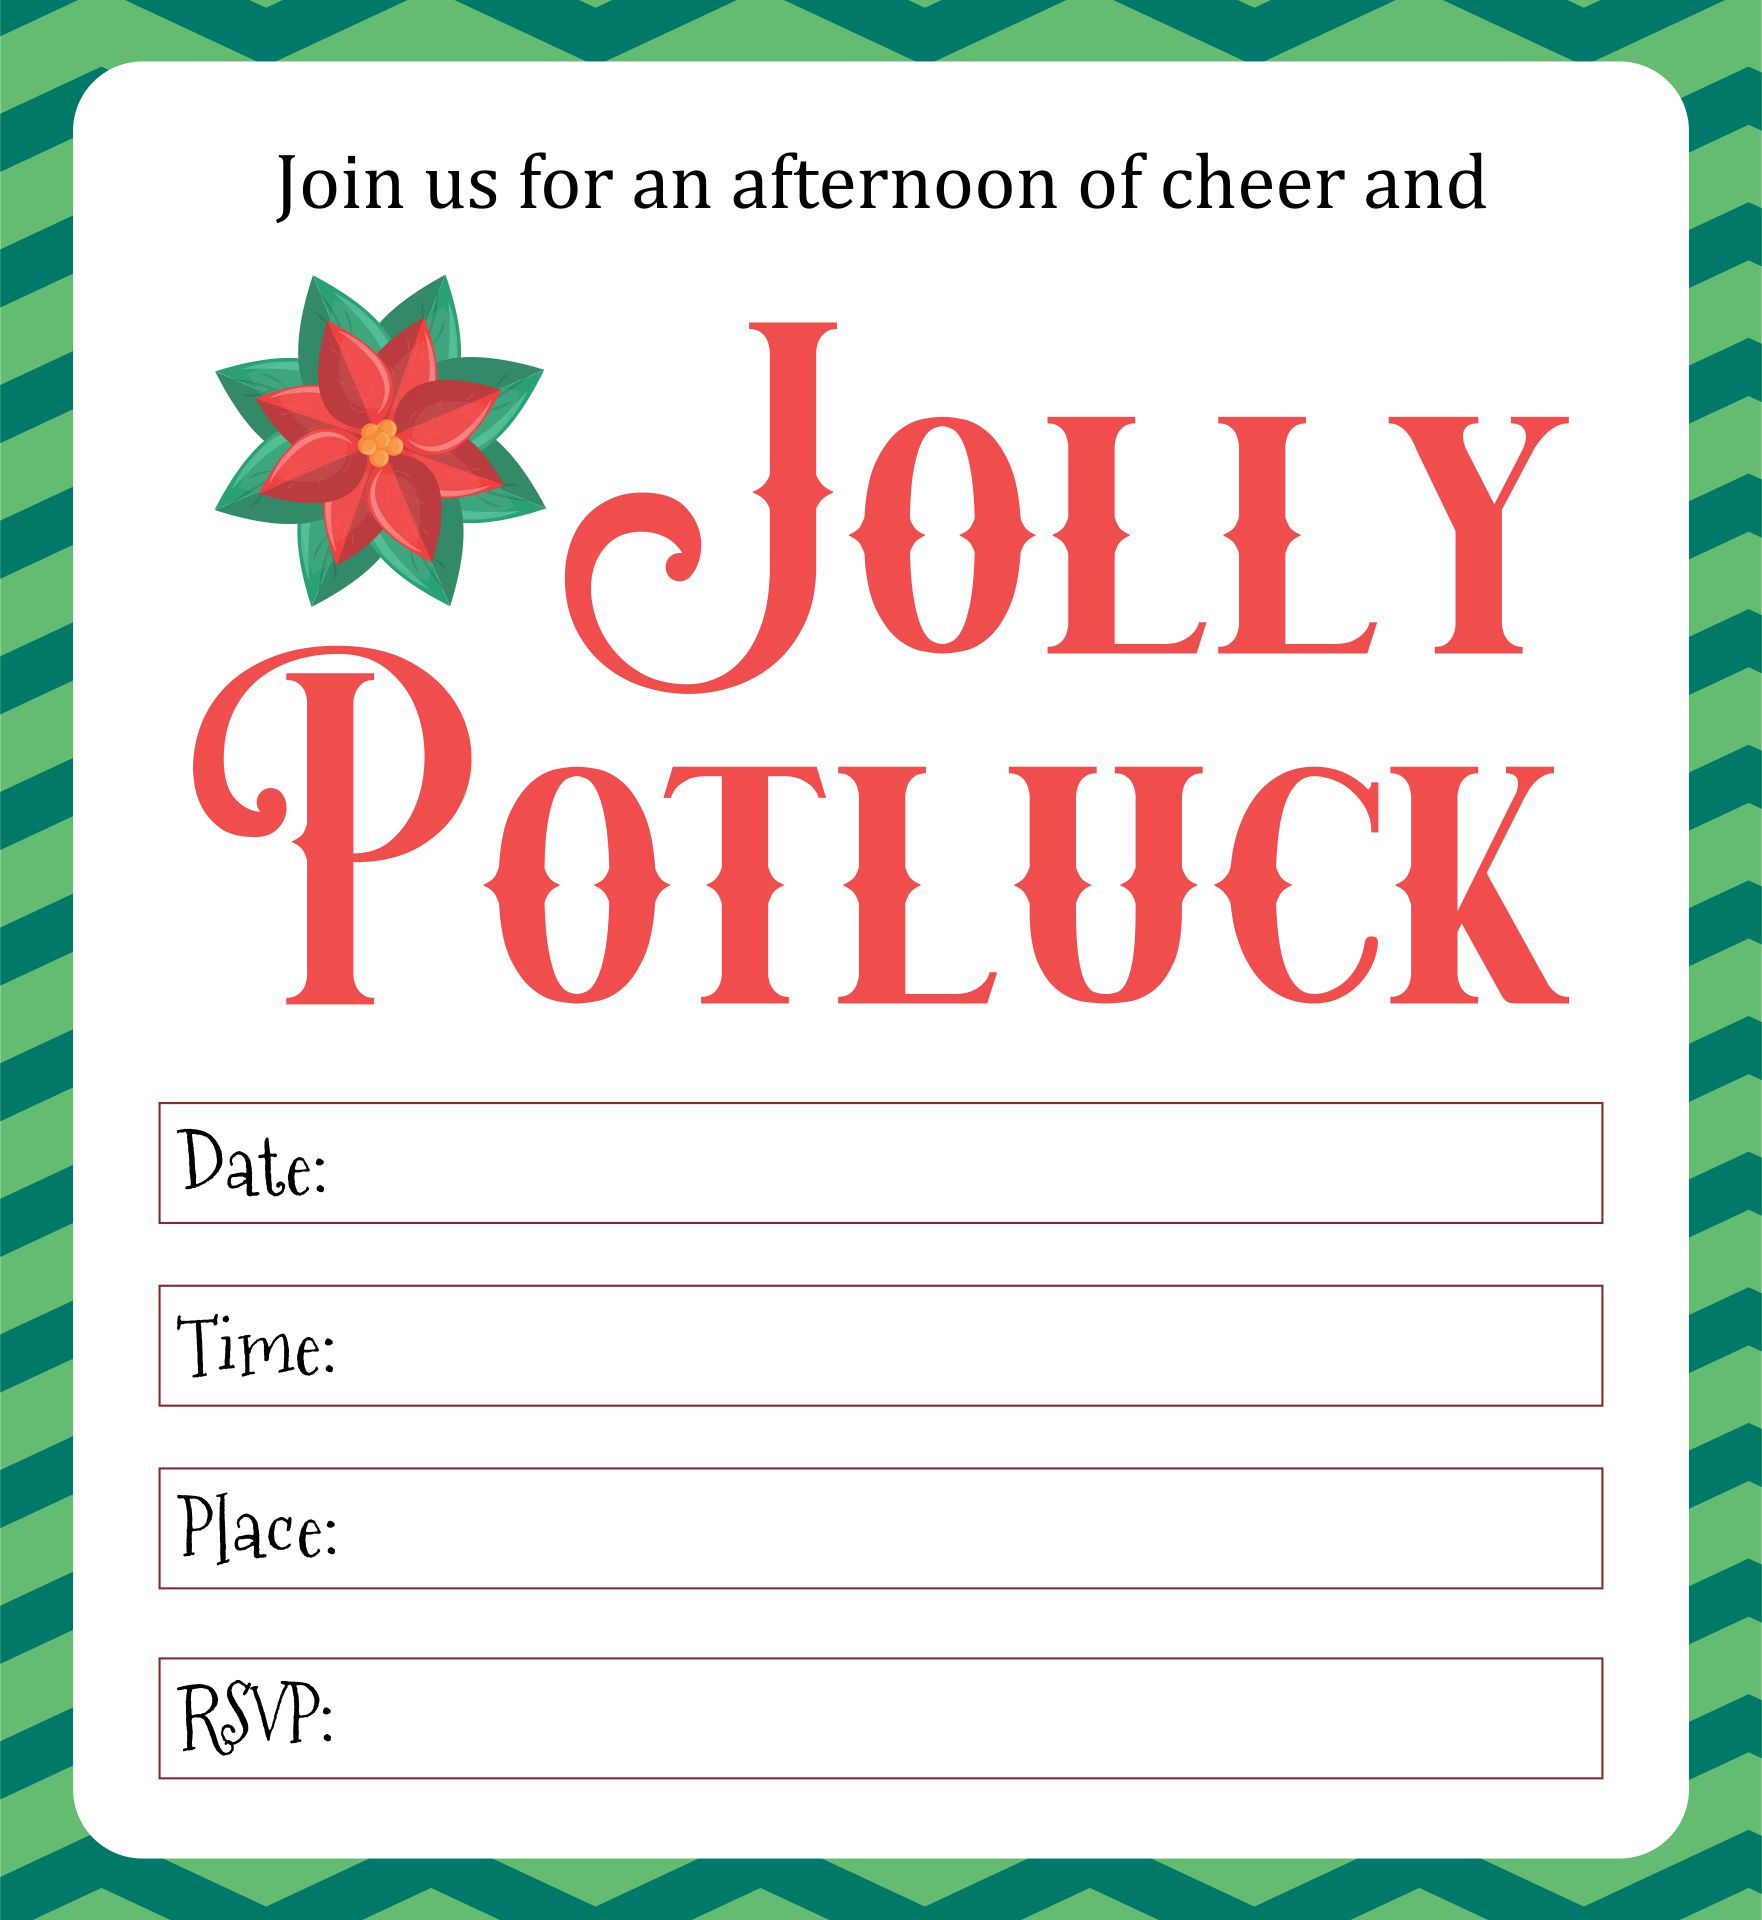 Christmas Dinner, Luncheon And Potluck Invitations